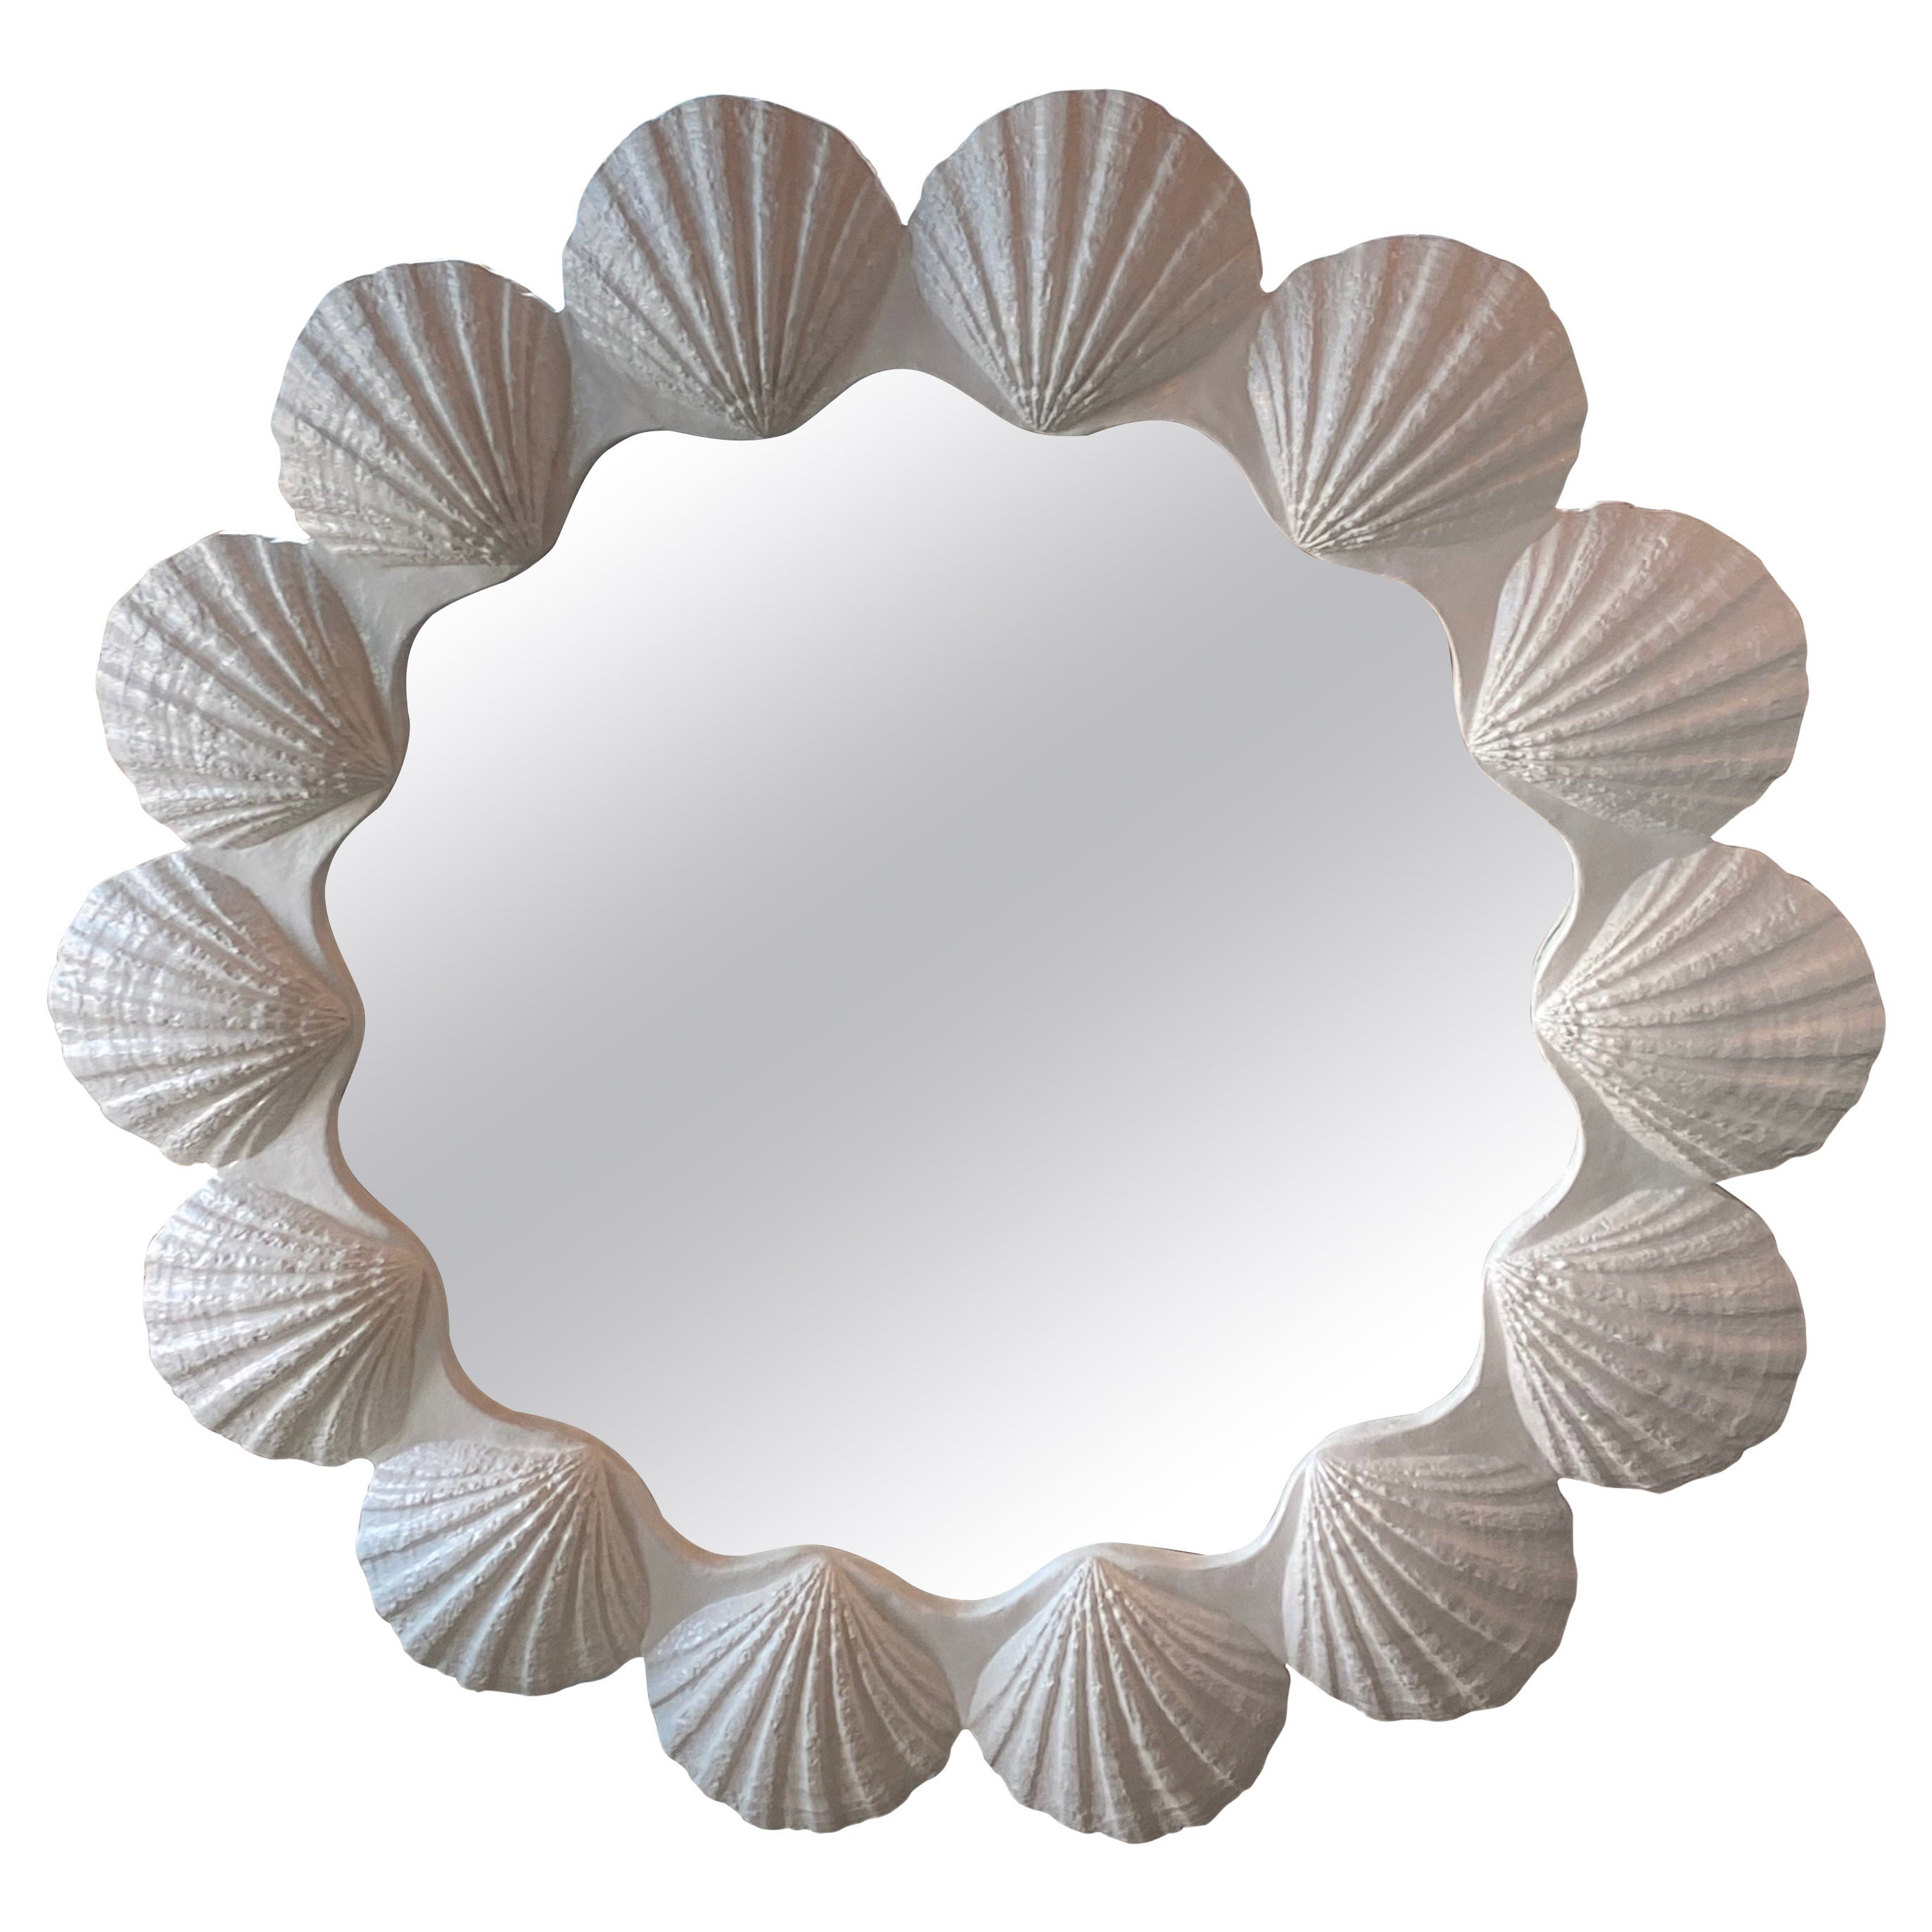 Vintage Round Lacquered Palm Beach Scallop Seashell Shell Mirror Pair Available